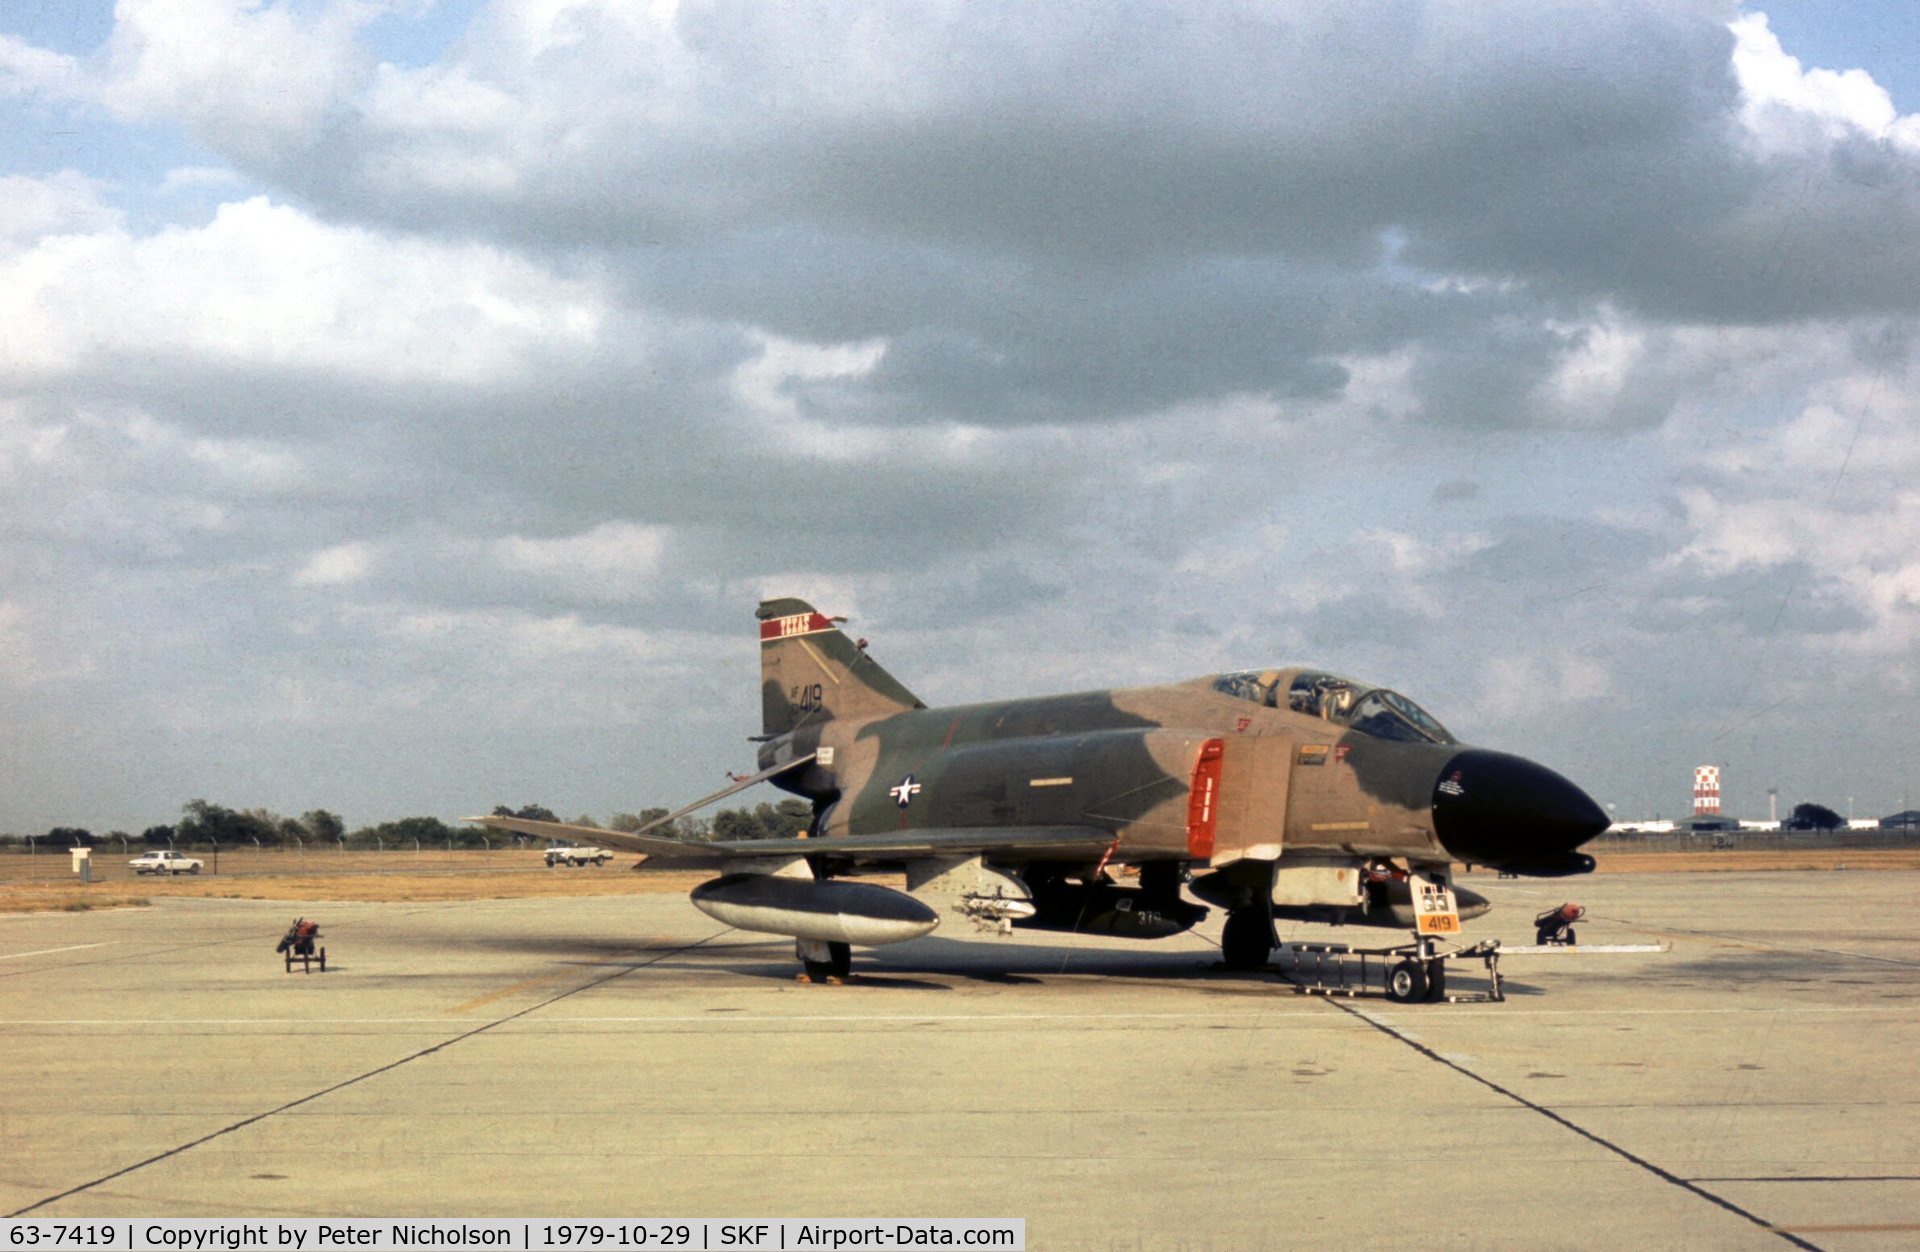 63-7419, 1963 McDonnell F-4C Phantom II C/N 355, Another view of the Texas Air National Guard F-4C Phantom seen at Kelly AFB in October 1979.